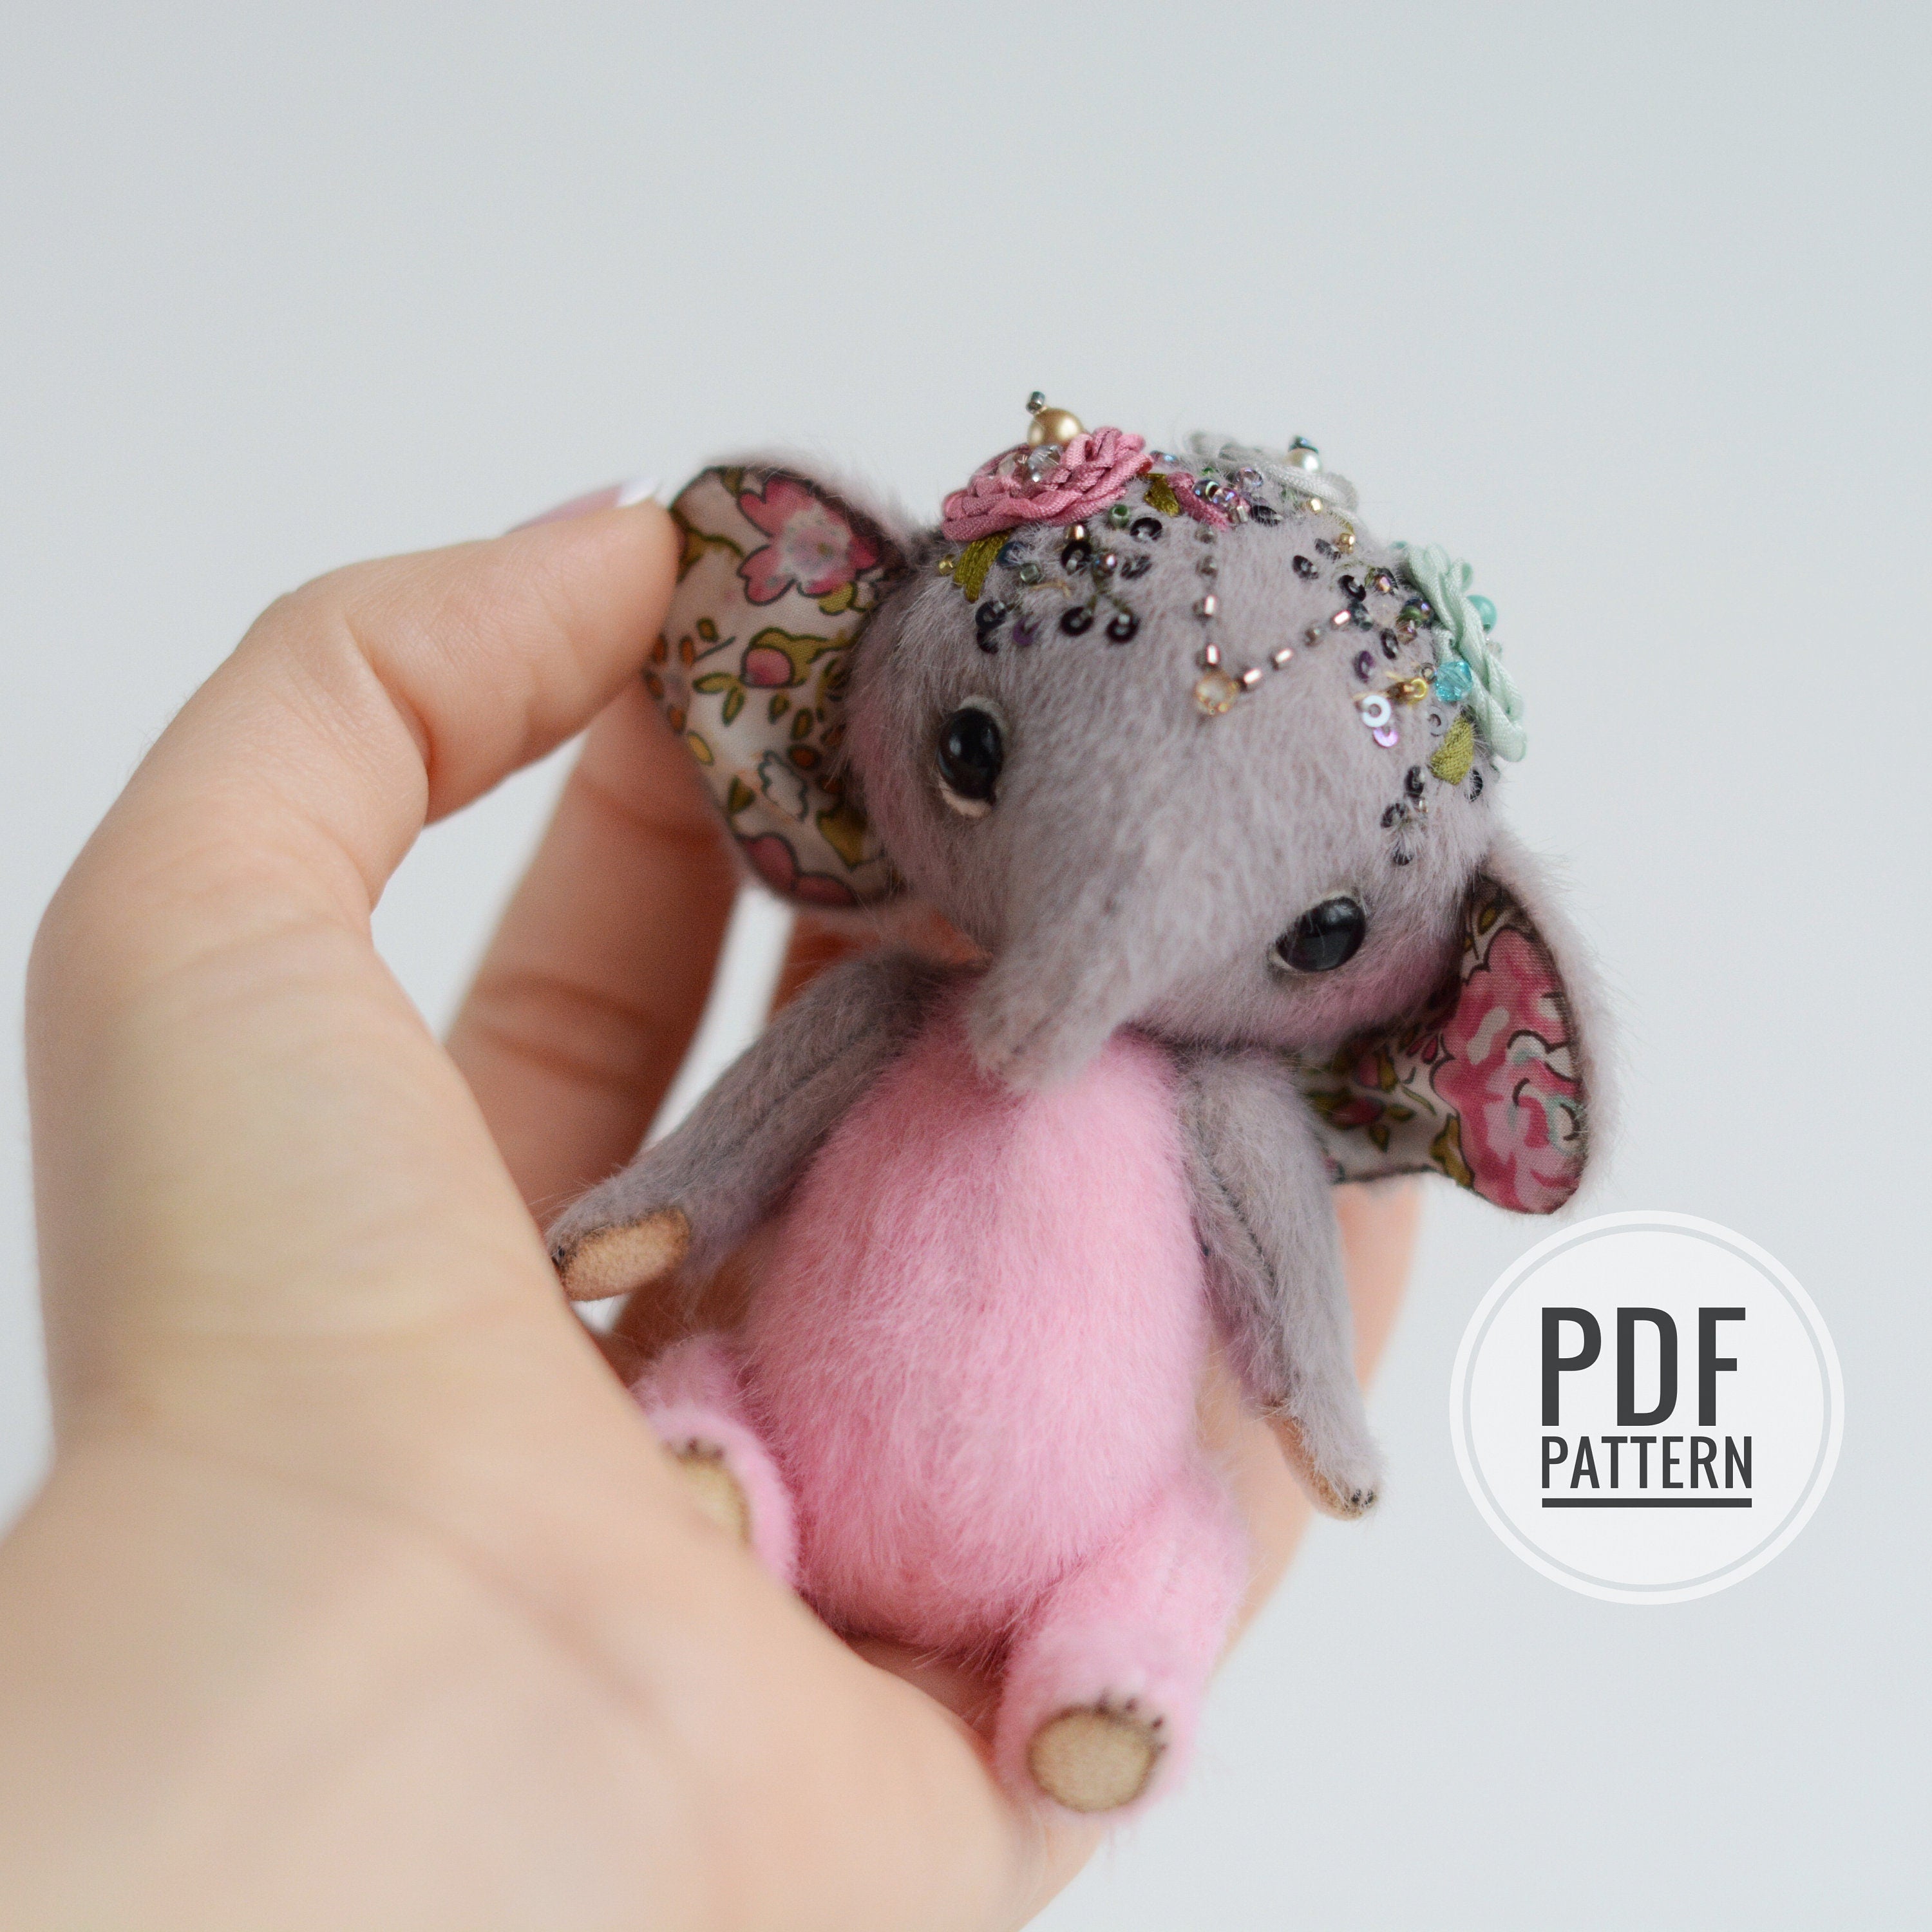 Miniature Teddy Elephant PATTERN PDF text instructions, easy teddy toy pattern for beginners, how to sew elephant stuffed toy